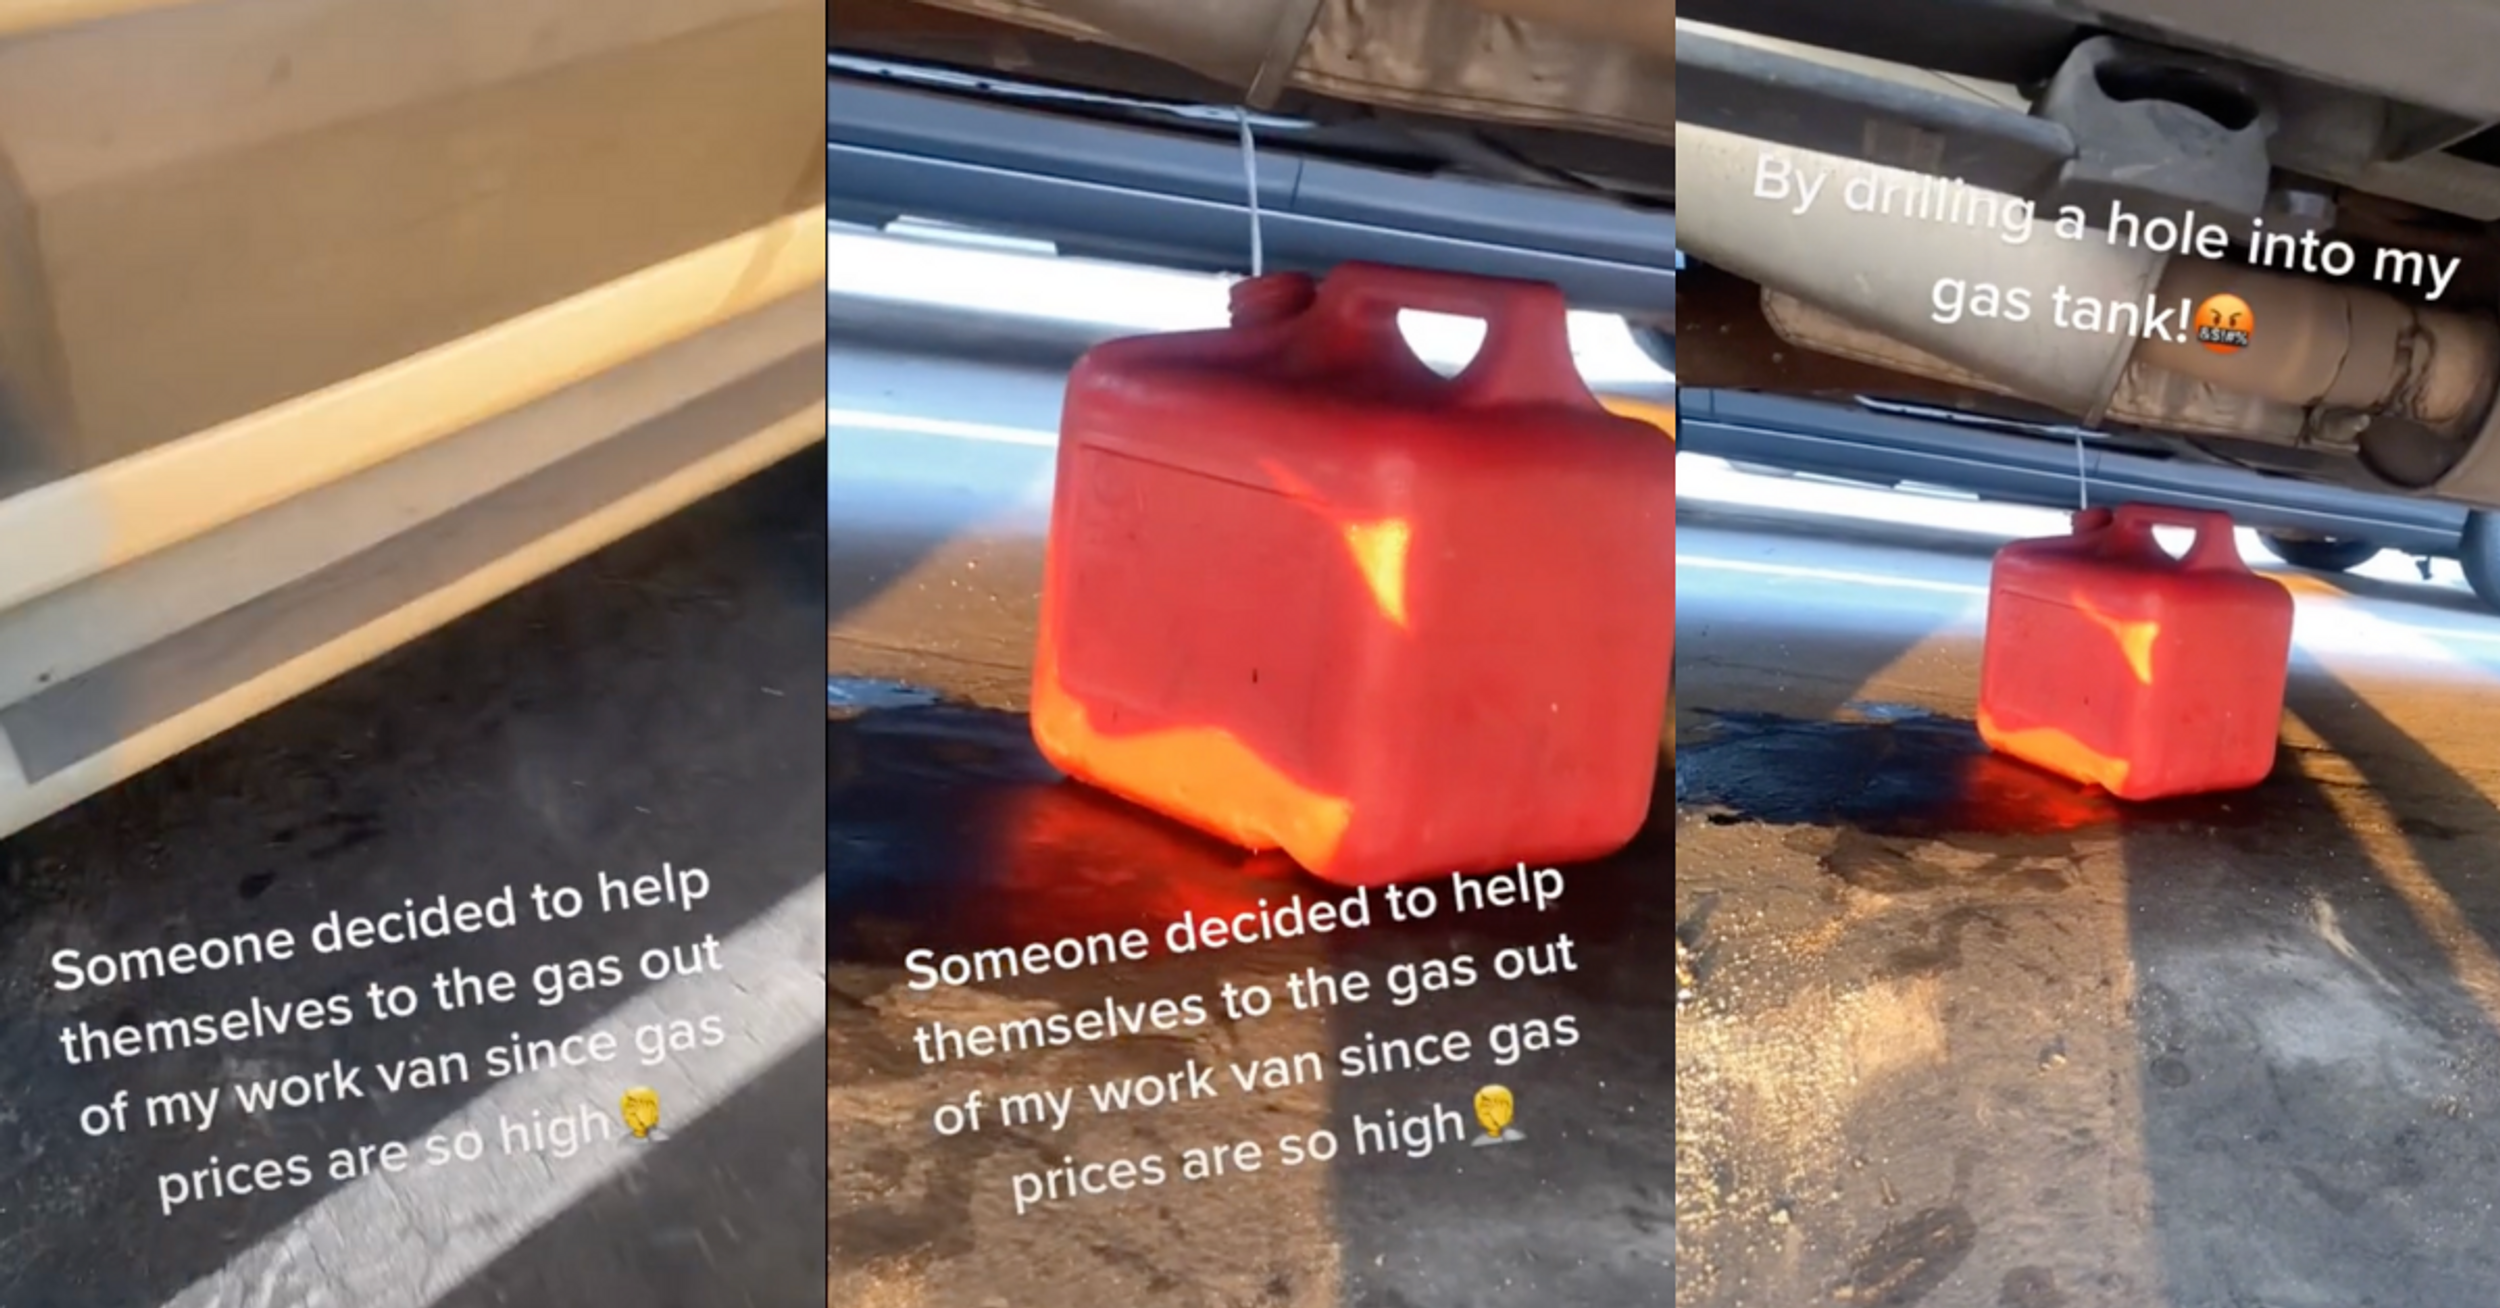 TikToker Floored To Find Someone Drilled Into Their Work Van's Gas Tank To Steal Gas Due To High Prices